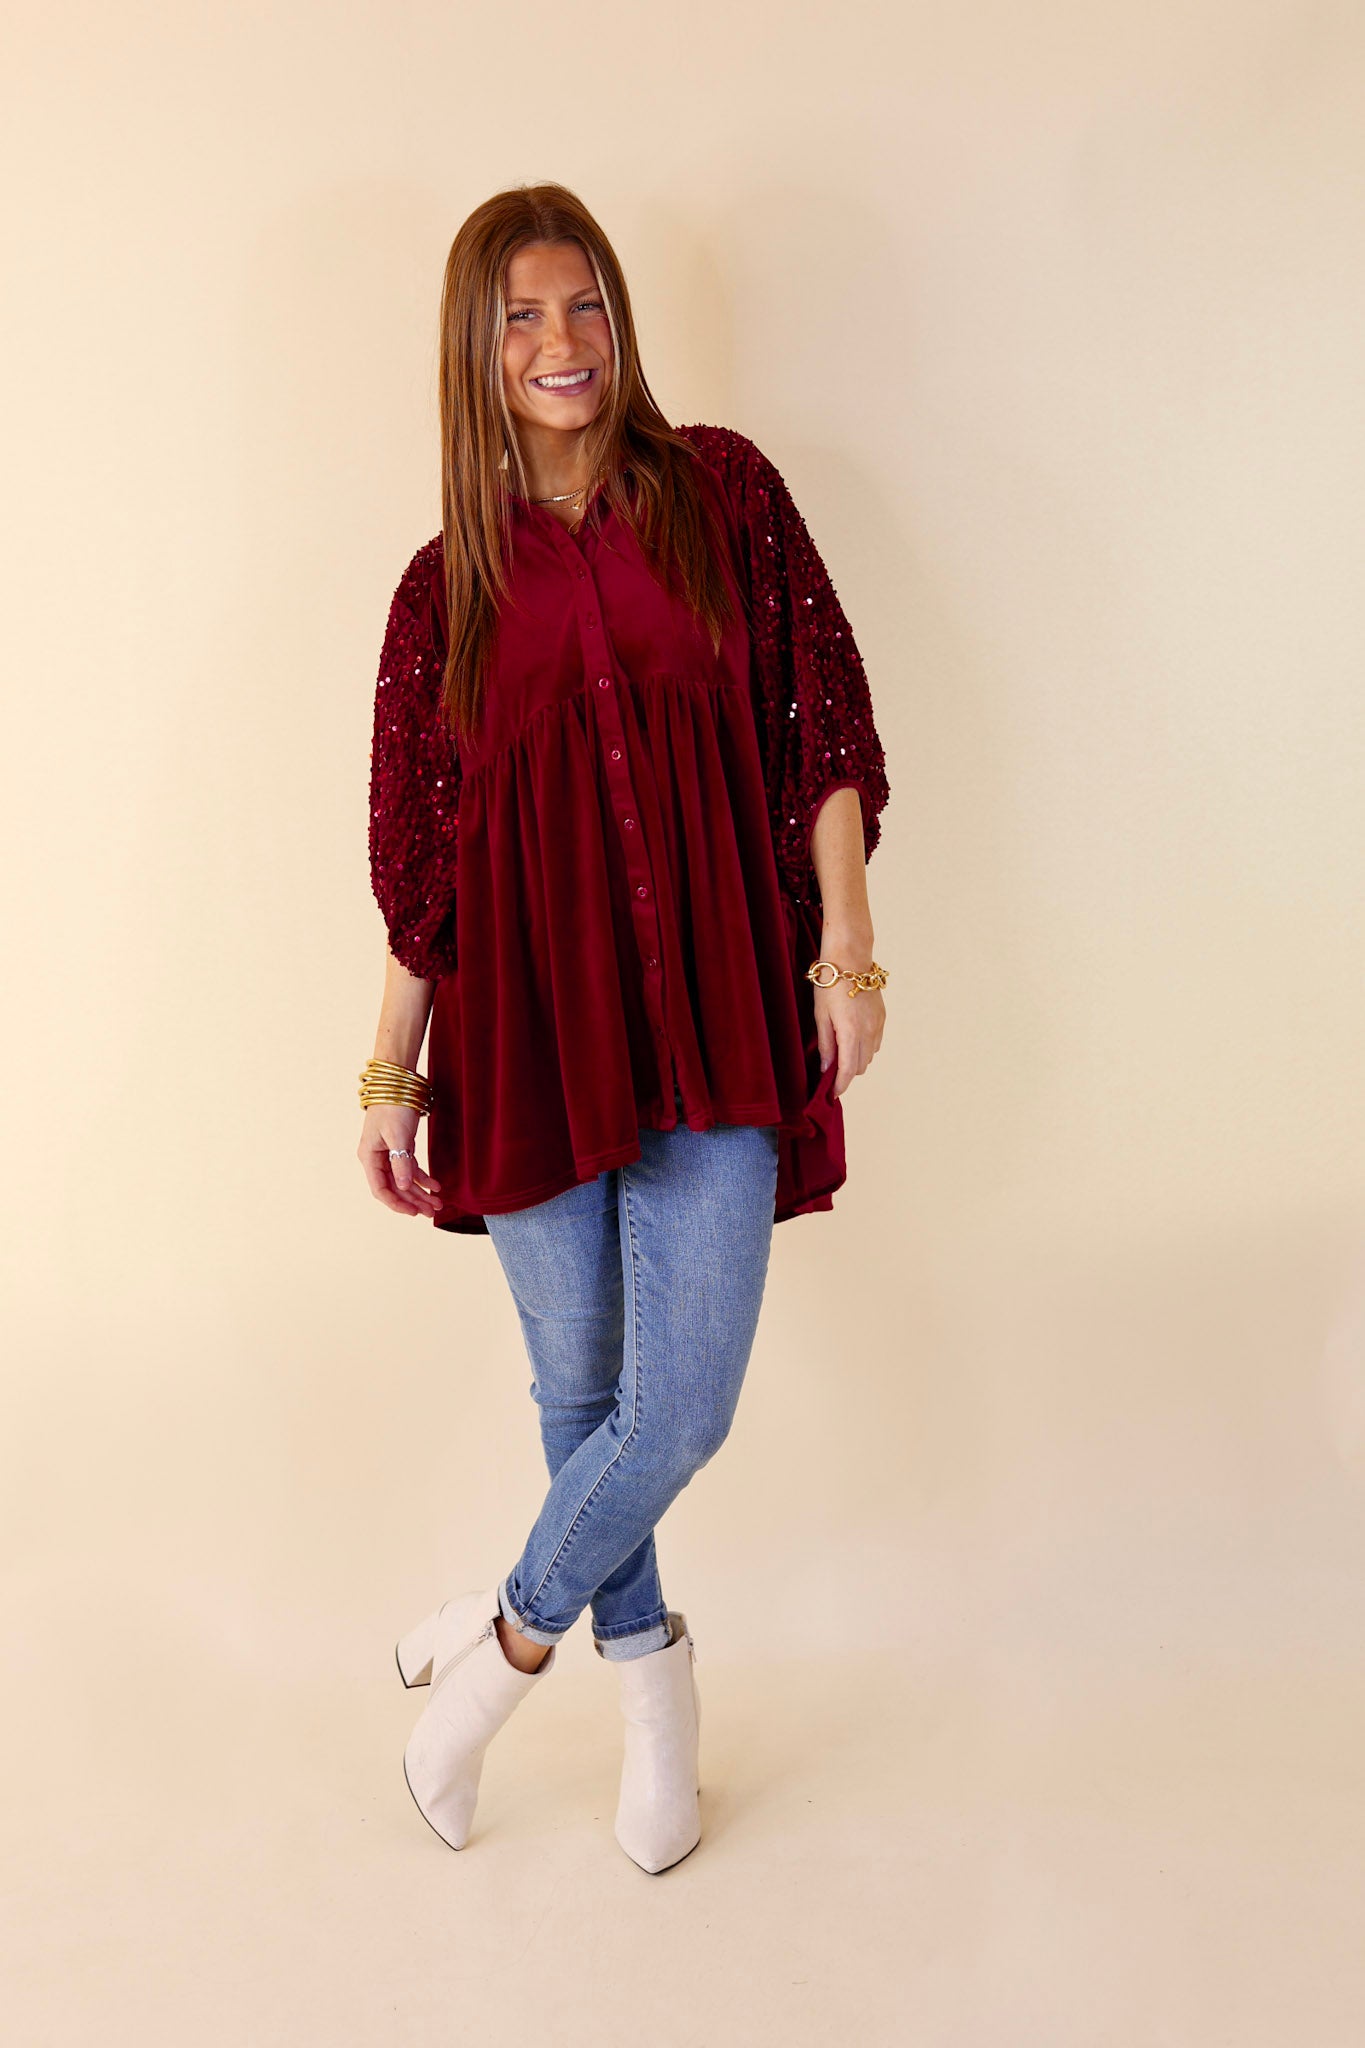 Love Link Button Up Velvet and Sequin Half Sleeve Babydoll Tunic Top in Wine Red - Giddy Up Glamour Boutique